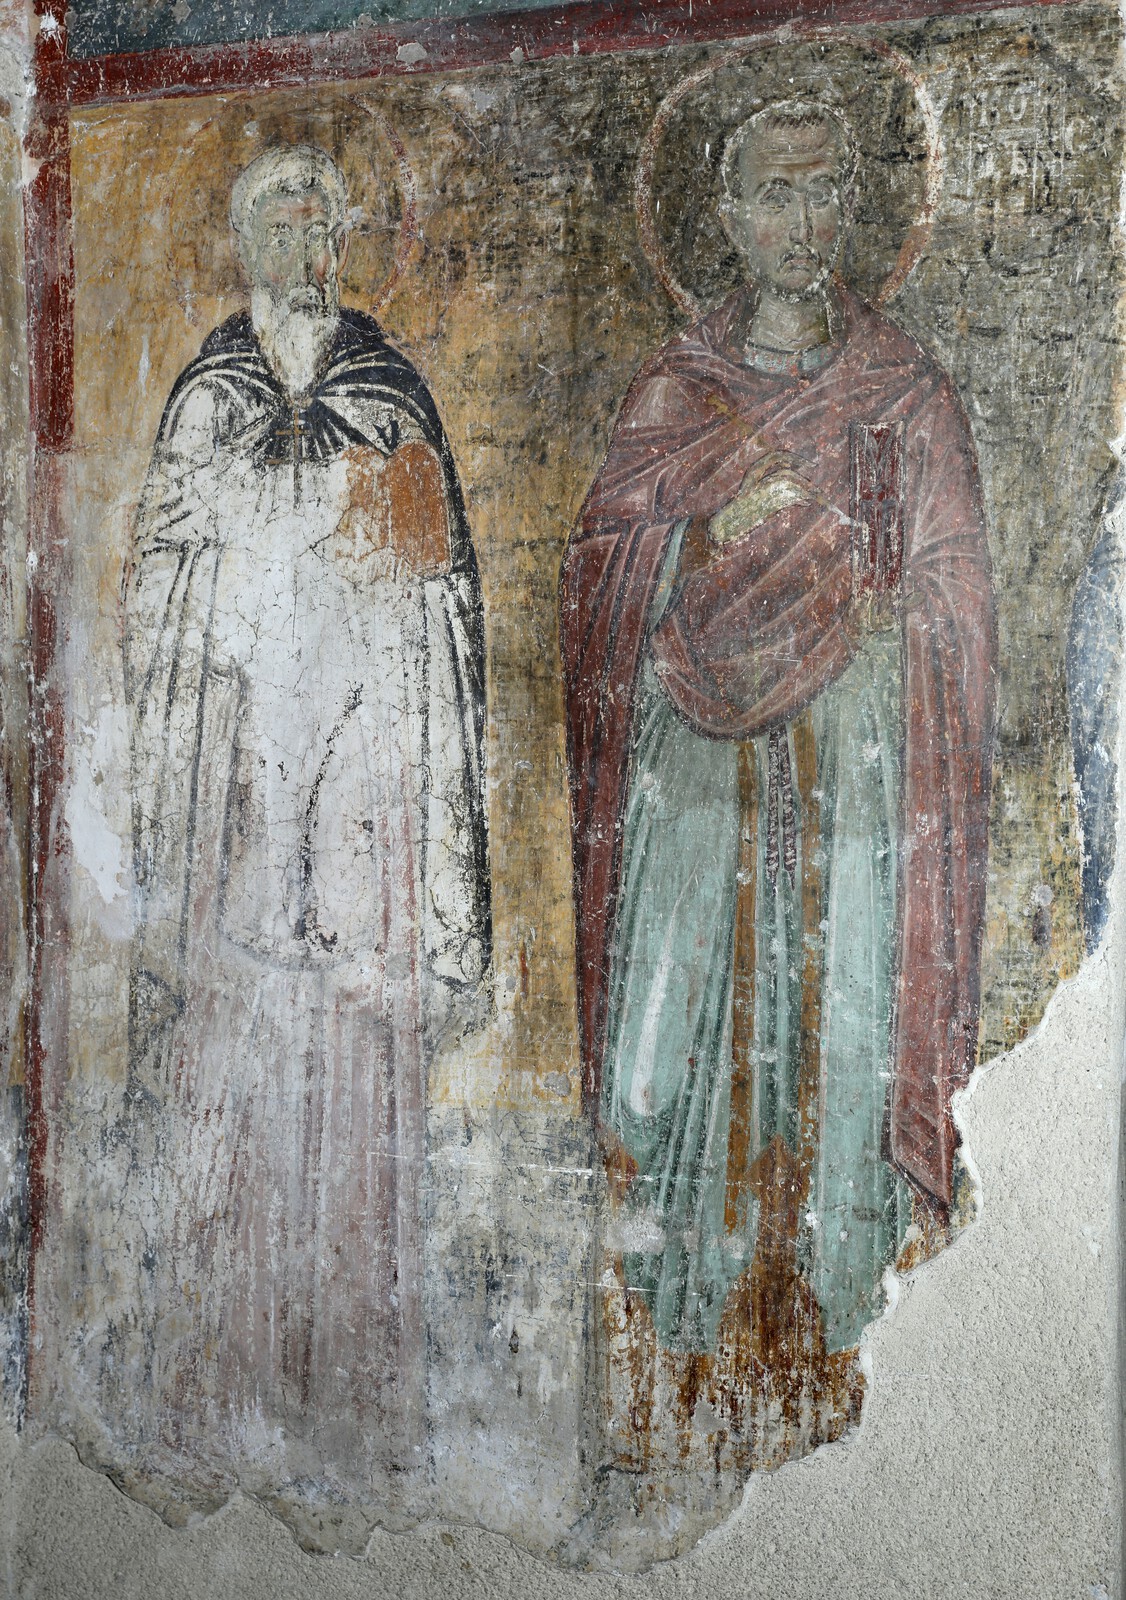 Sts. Stephen the Younger and Cosmas